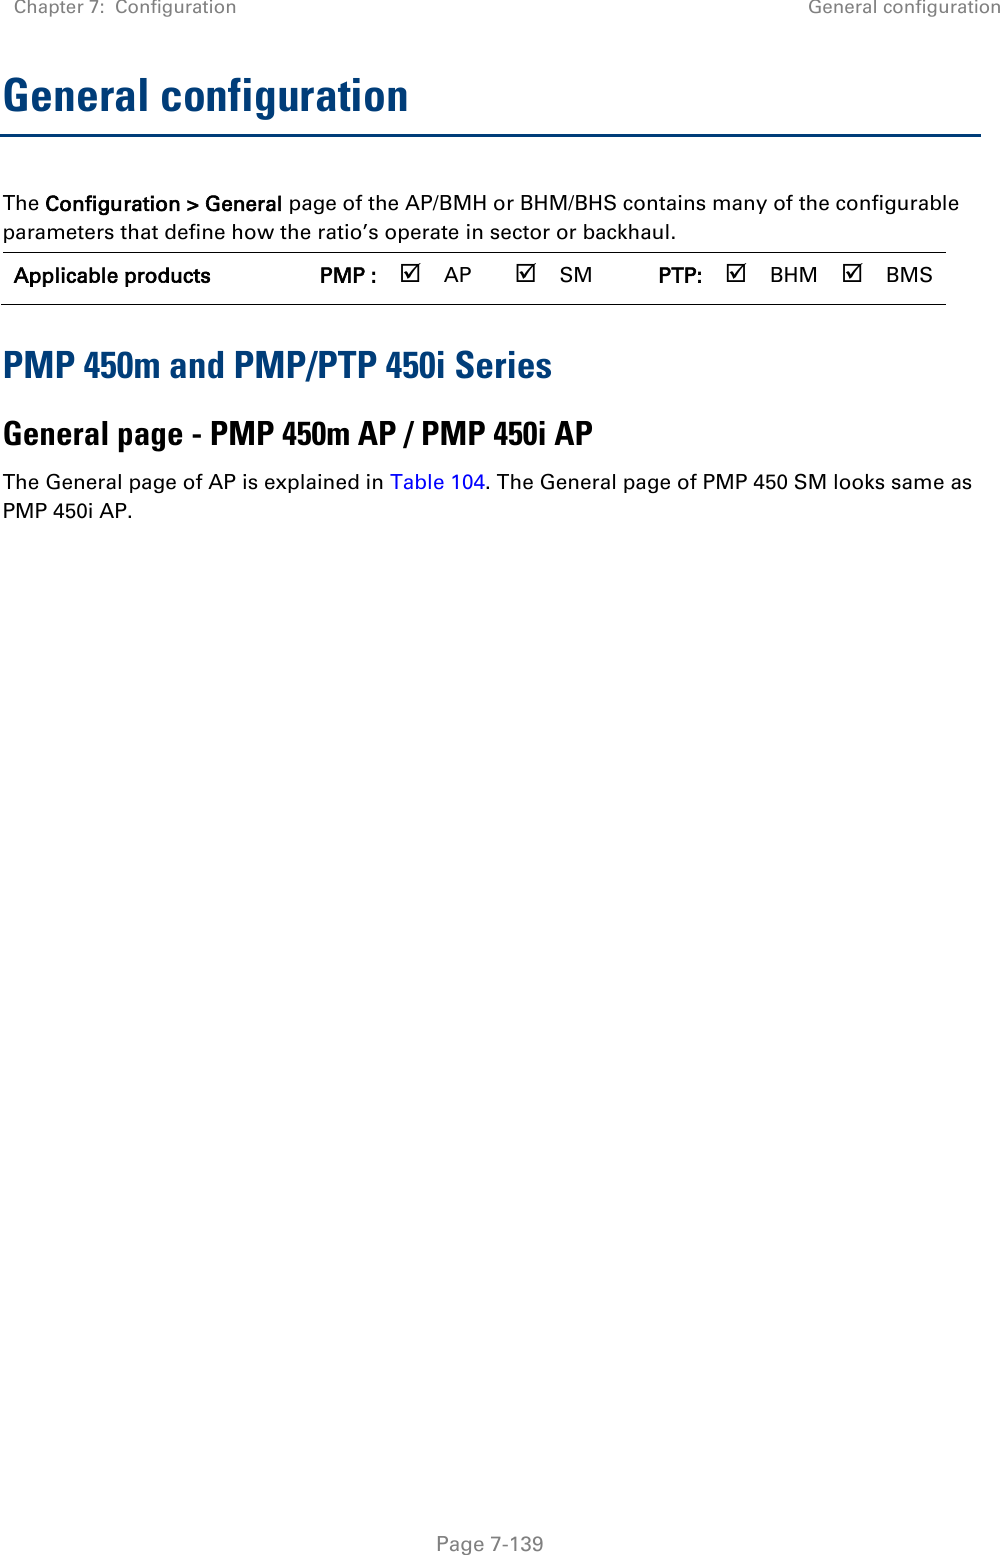 Chapter 7:  Configuration General configuration   Page 7-139 General configuration The Configuration &gt; General page of the AP/BMH or BHM/BHS contains many of the configurable parameters that define how the ratio’s operate in sector or backhaul. Applicable products PMP :  AP  SM PTP:  BHM  BMS PMP 450m and PMP/PTP 450i Series General page - PMP 450m AP / PMP 450i AP  The General page of AP is explained in Table 104. The General page of PMP 450 SM looks same as PMP 450i AP.   